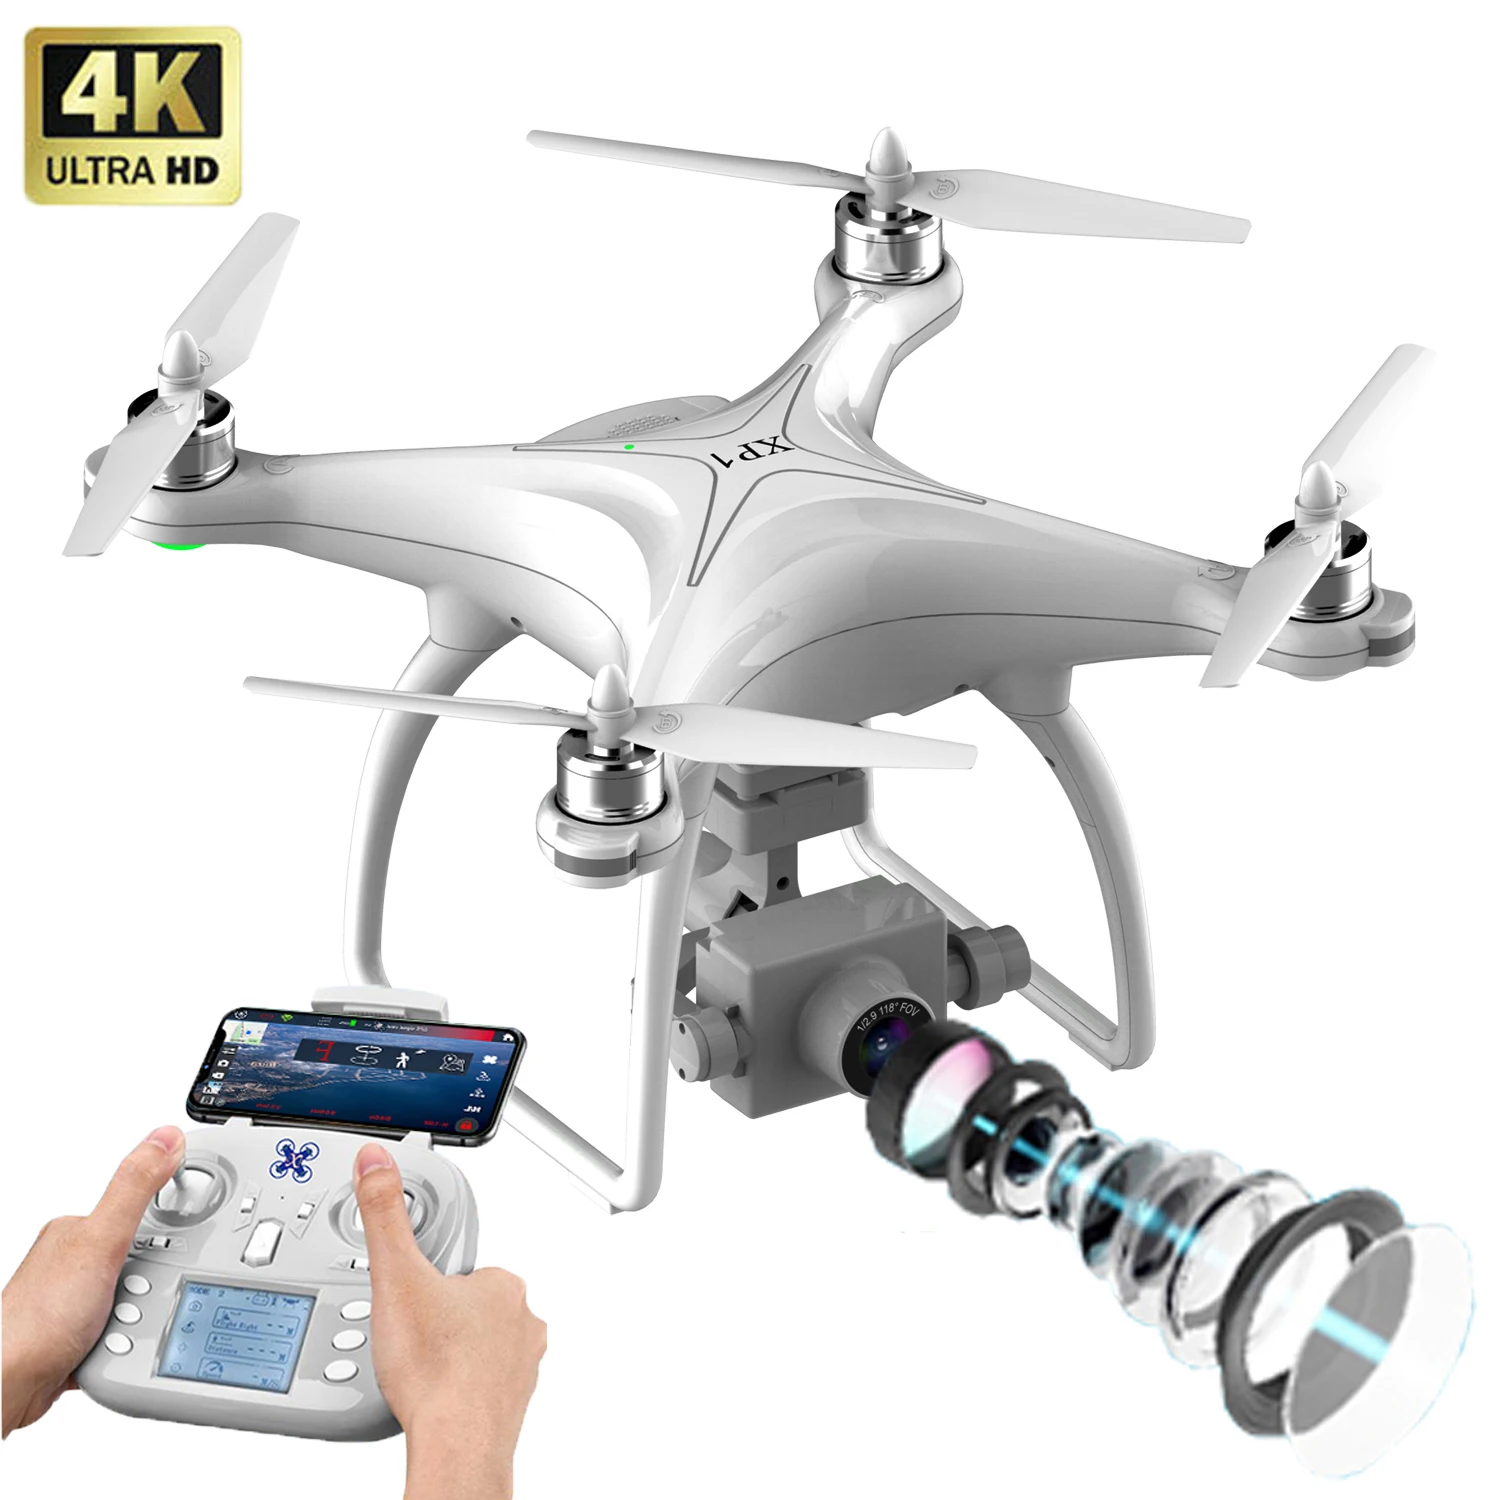 

New 4K HD Drone Aerial Quadcopter Drone Uav Professional Aerial Vehicle Drones with Intelligent Following